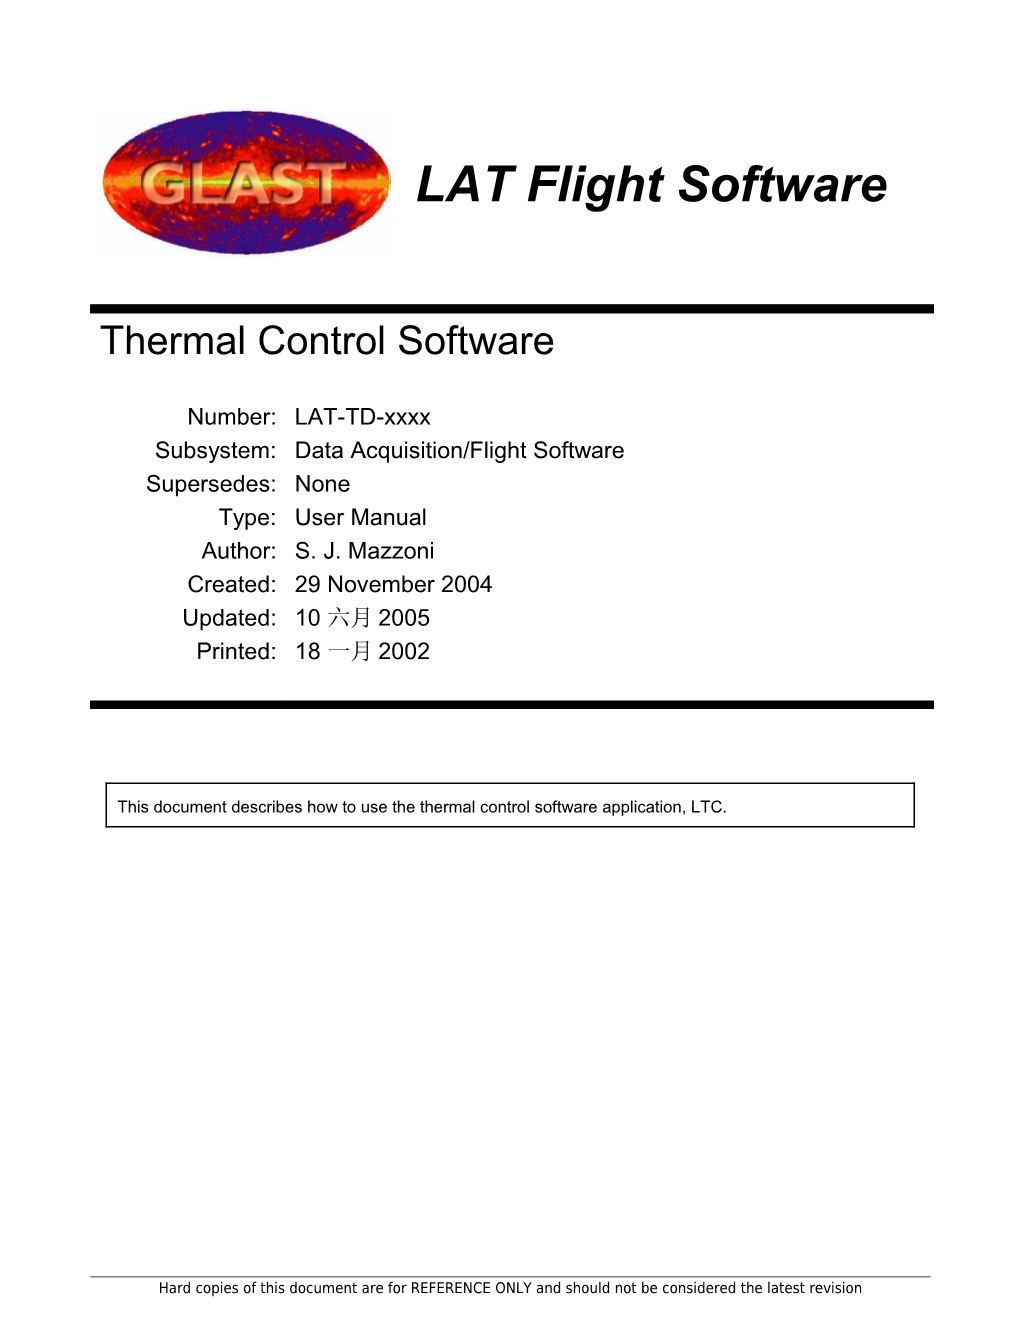 Thermal Control Software